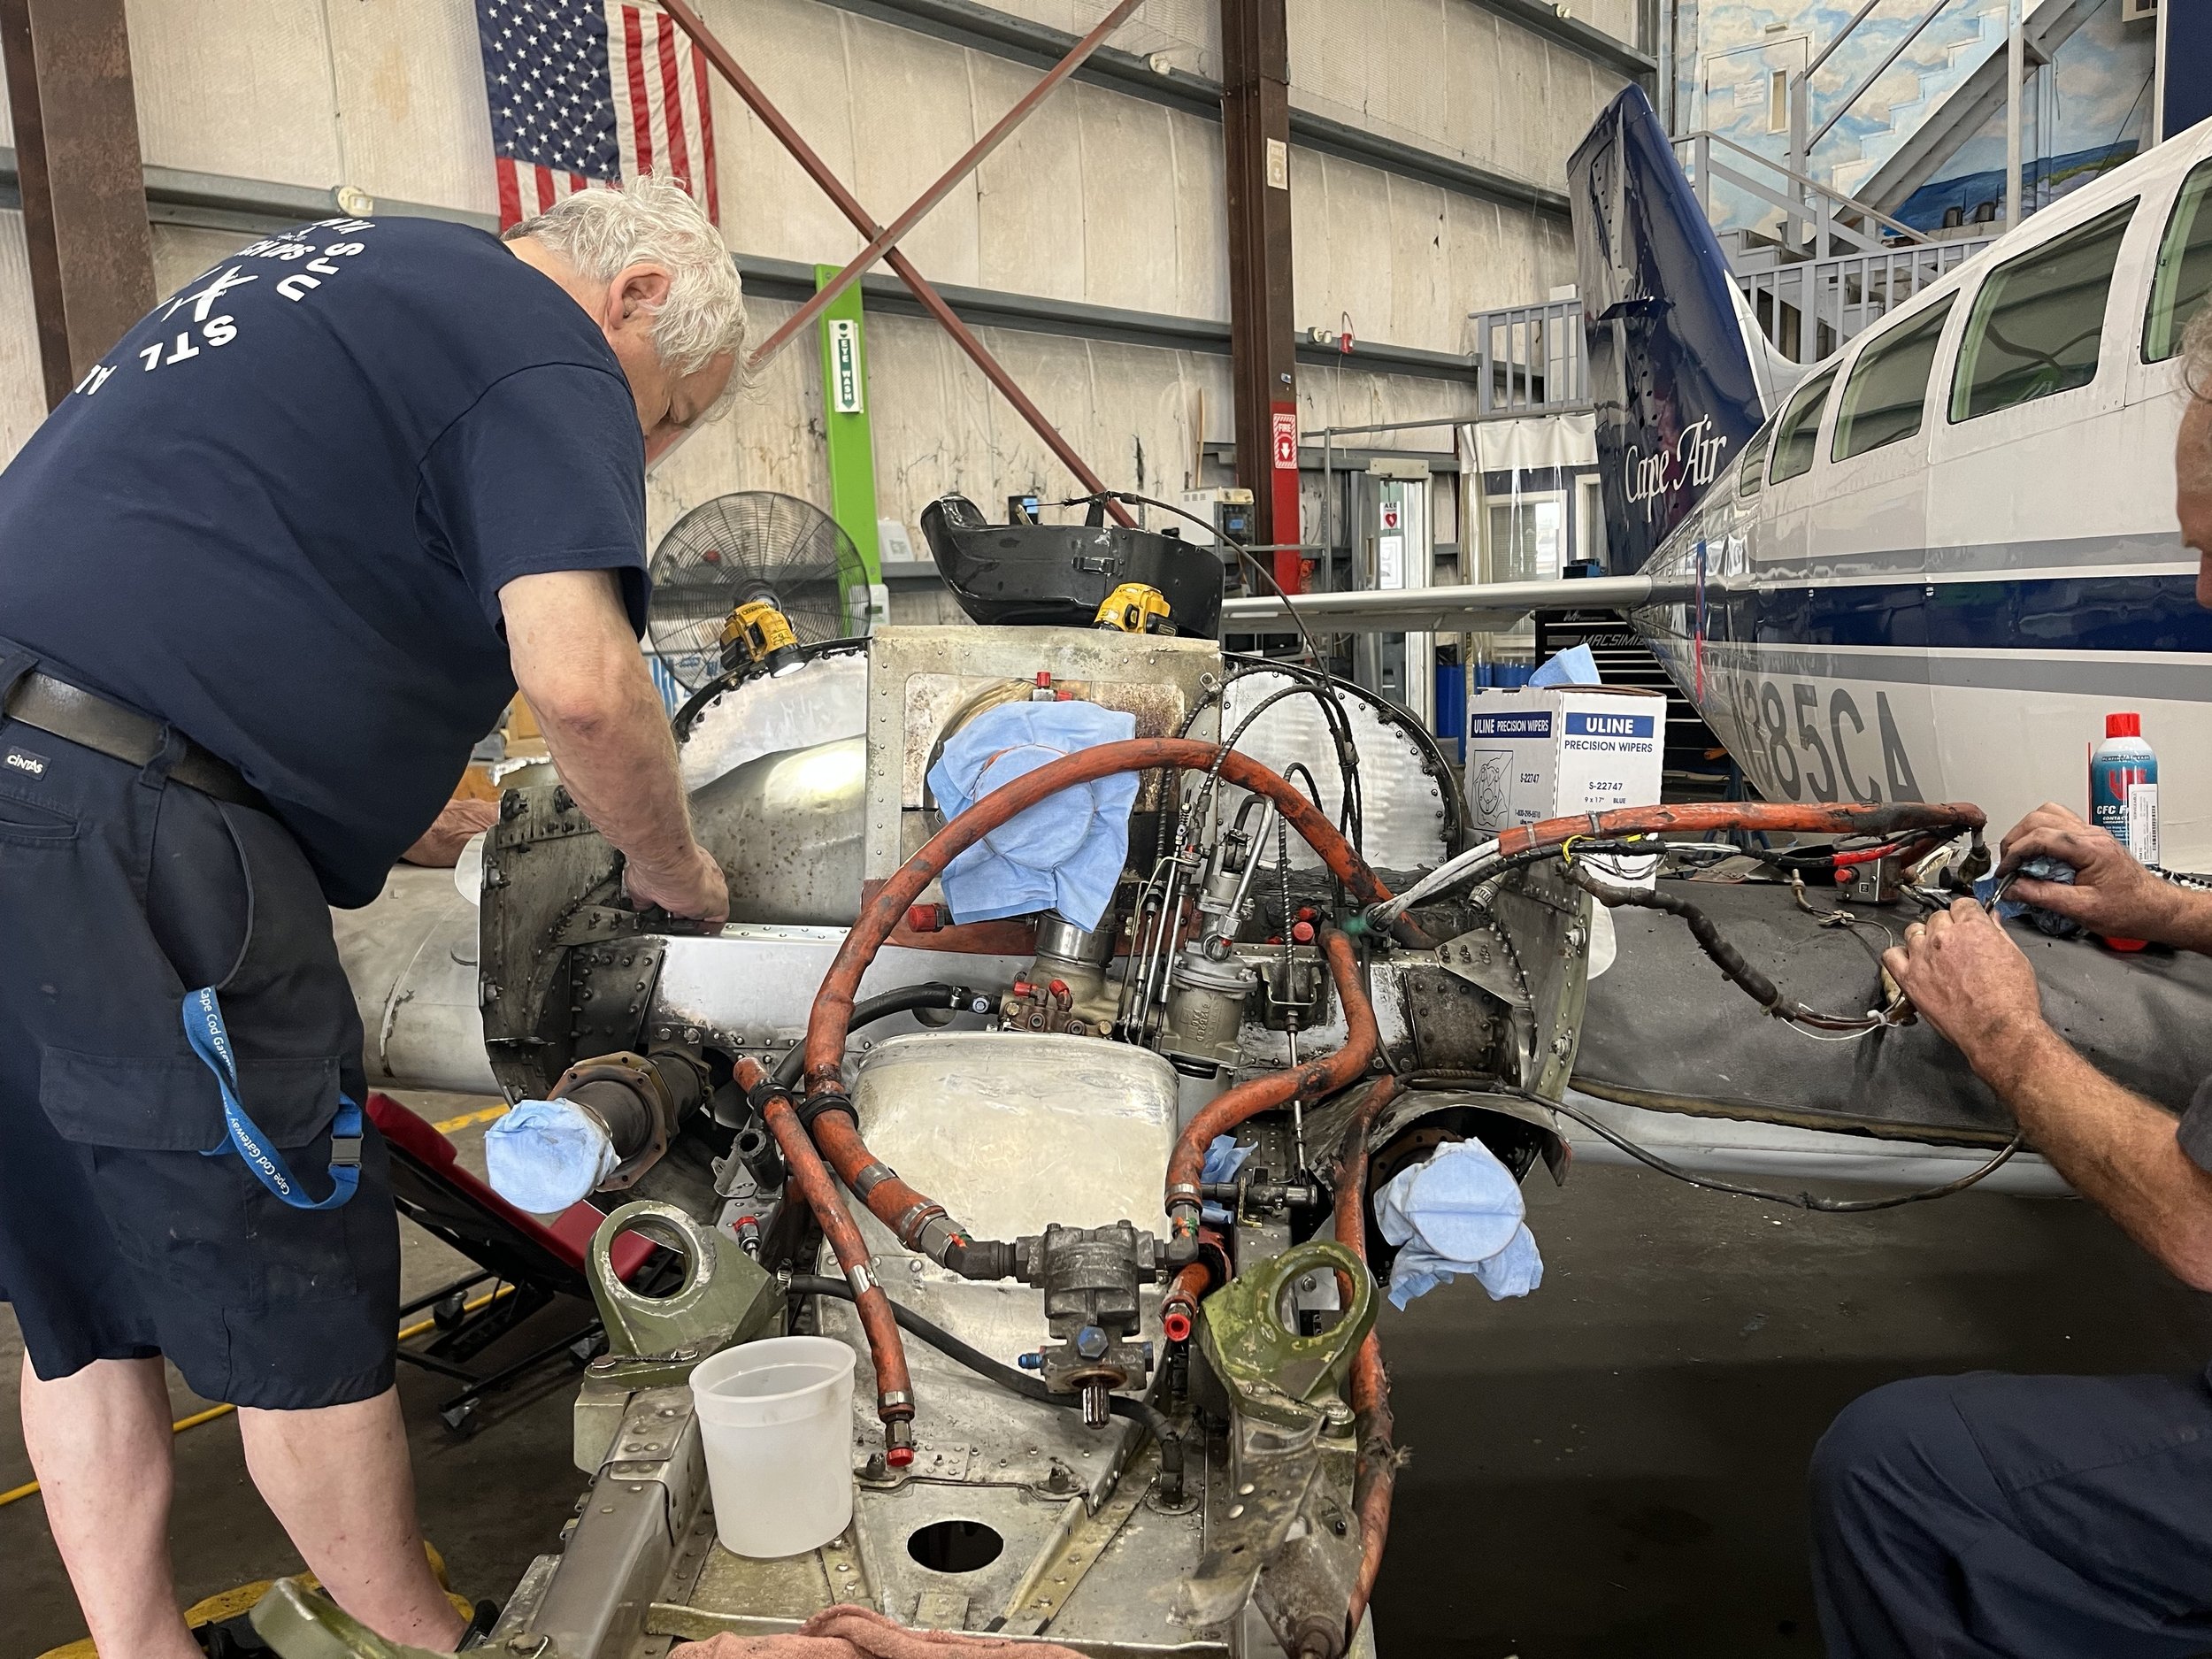  Technicians Joe Urbanski and Scott Genthner working on an engine change. With an electric engines, maintenance like this would be far less frequent. Photo by Justine Paradis. 